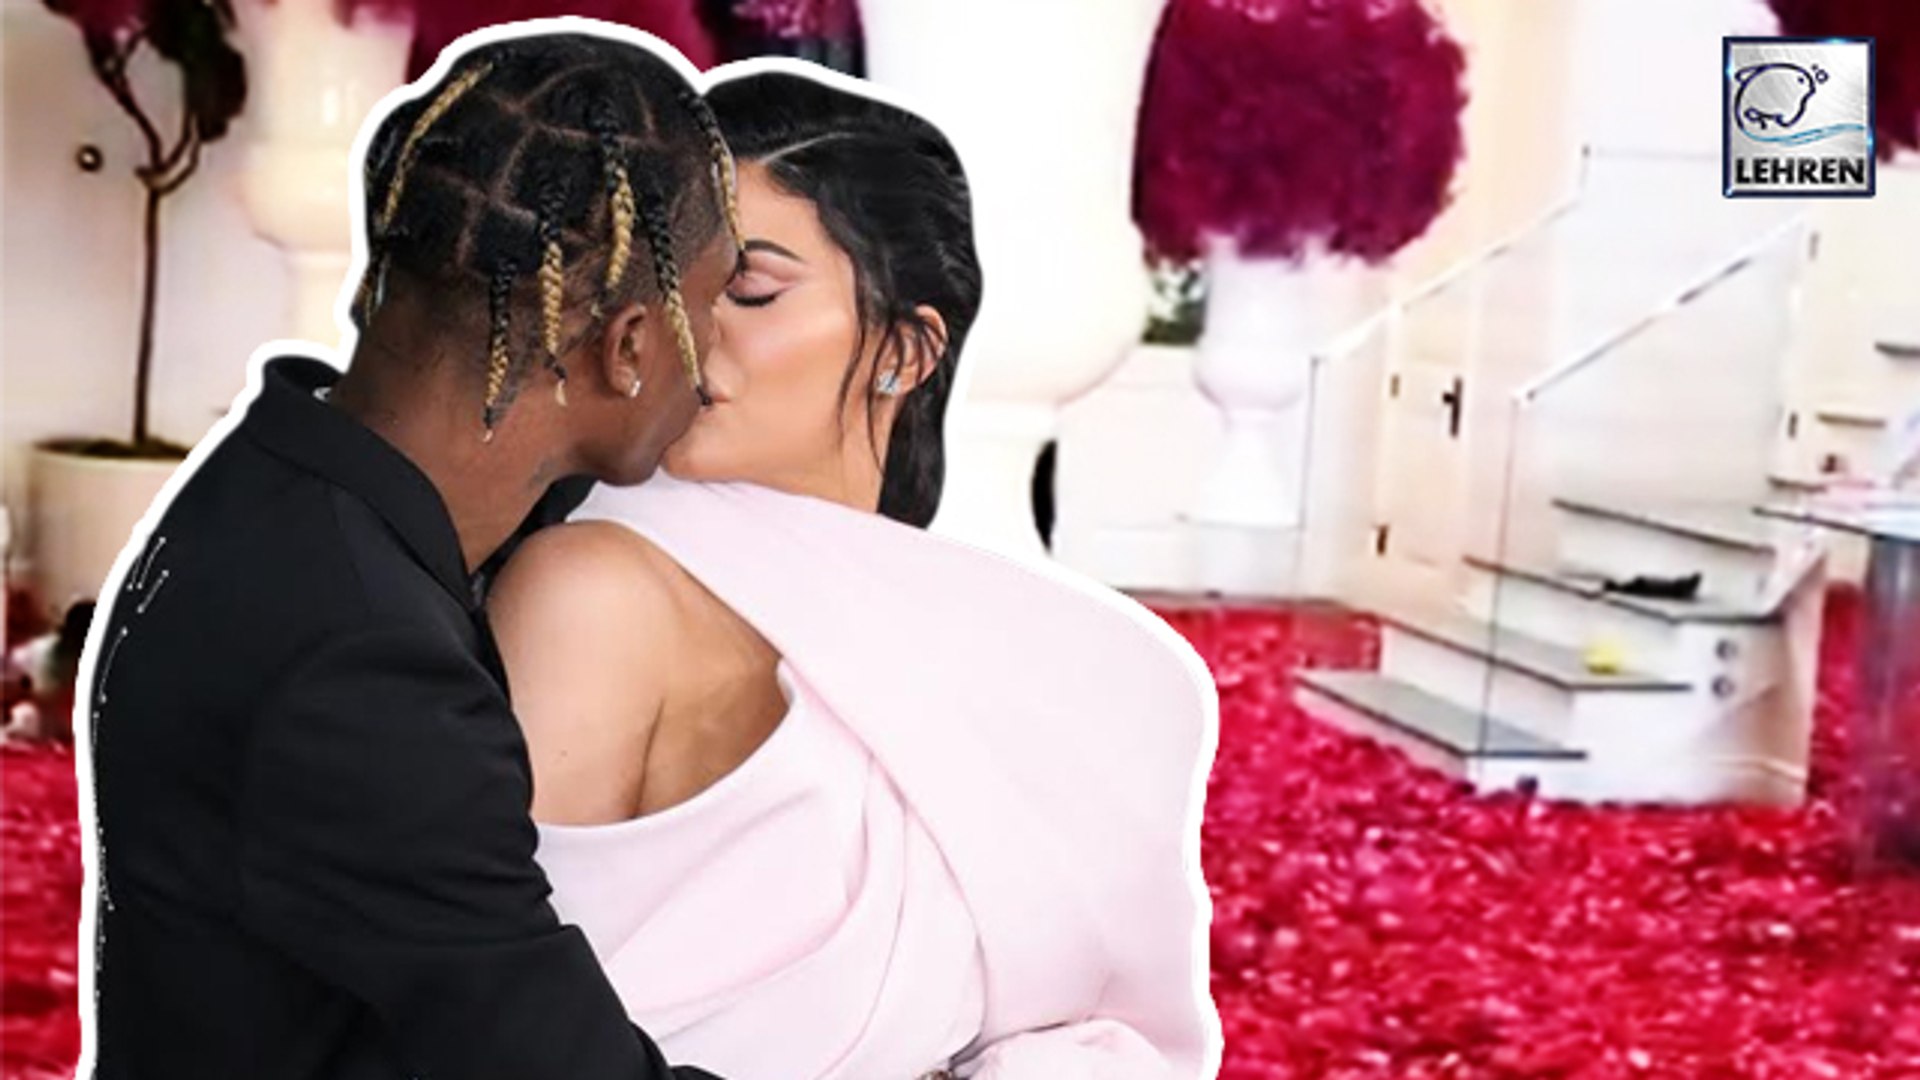 Travis Scott Covers Kylie Jenner’s House in Rose Petals For Her 22nd Birthday